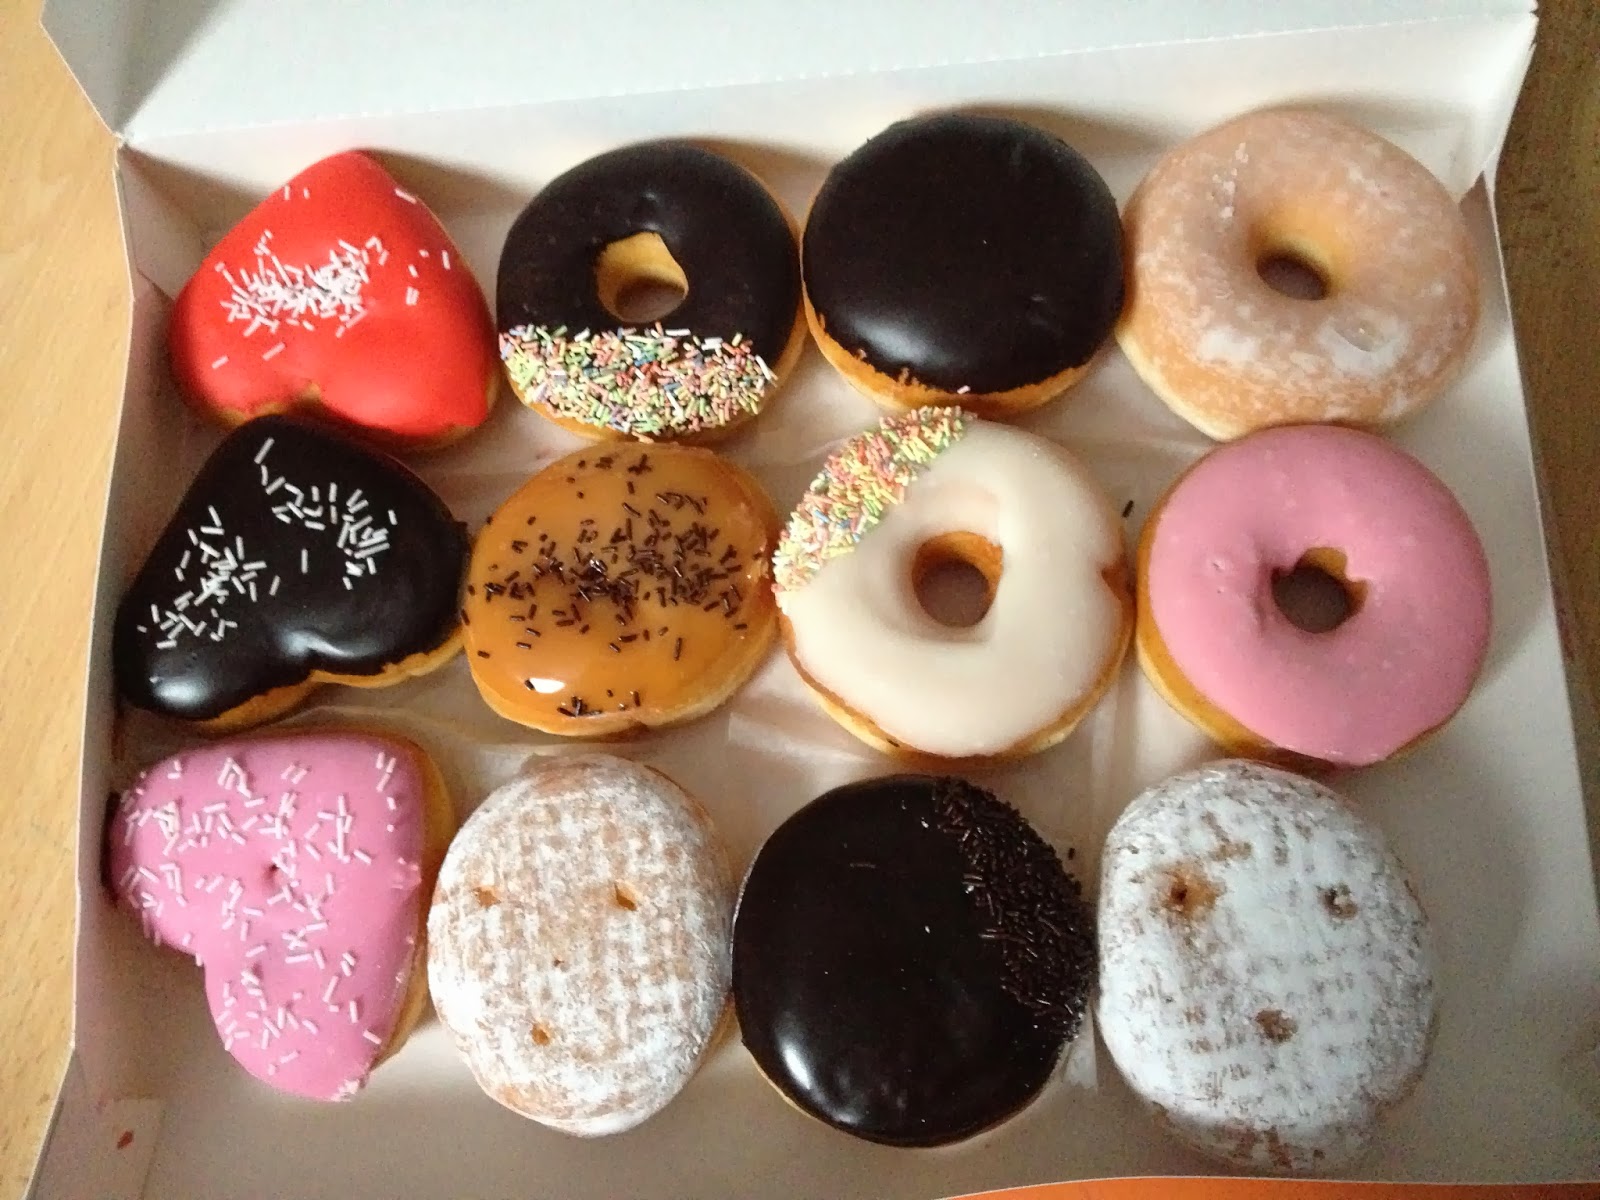 A Review A Day: Today's Review: Donuts From Dunkin' Donuts